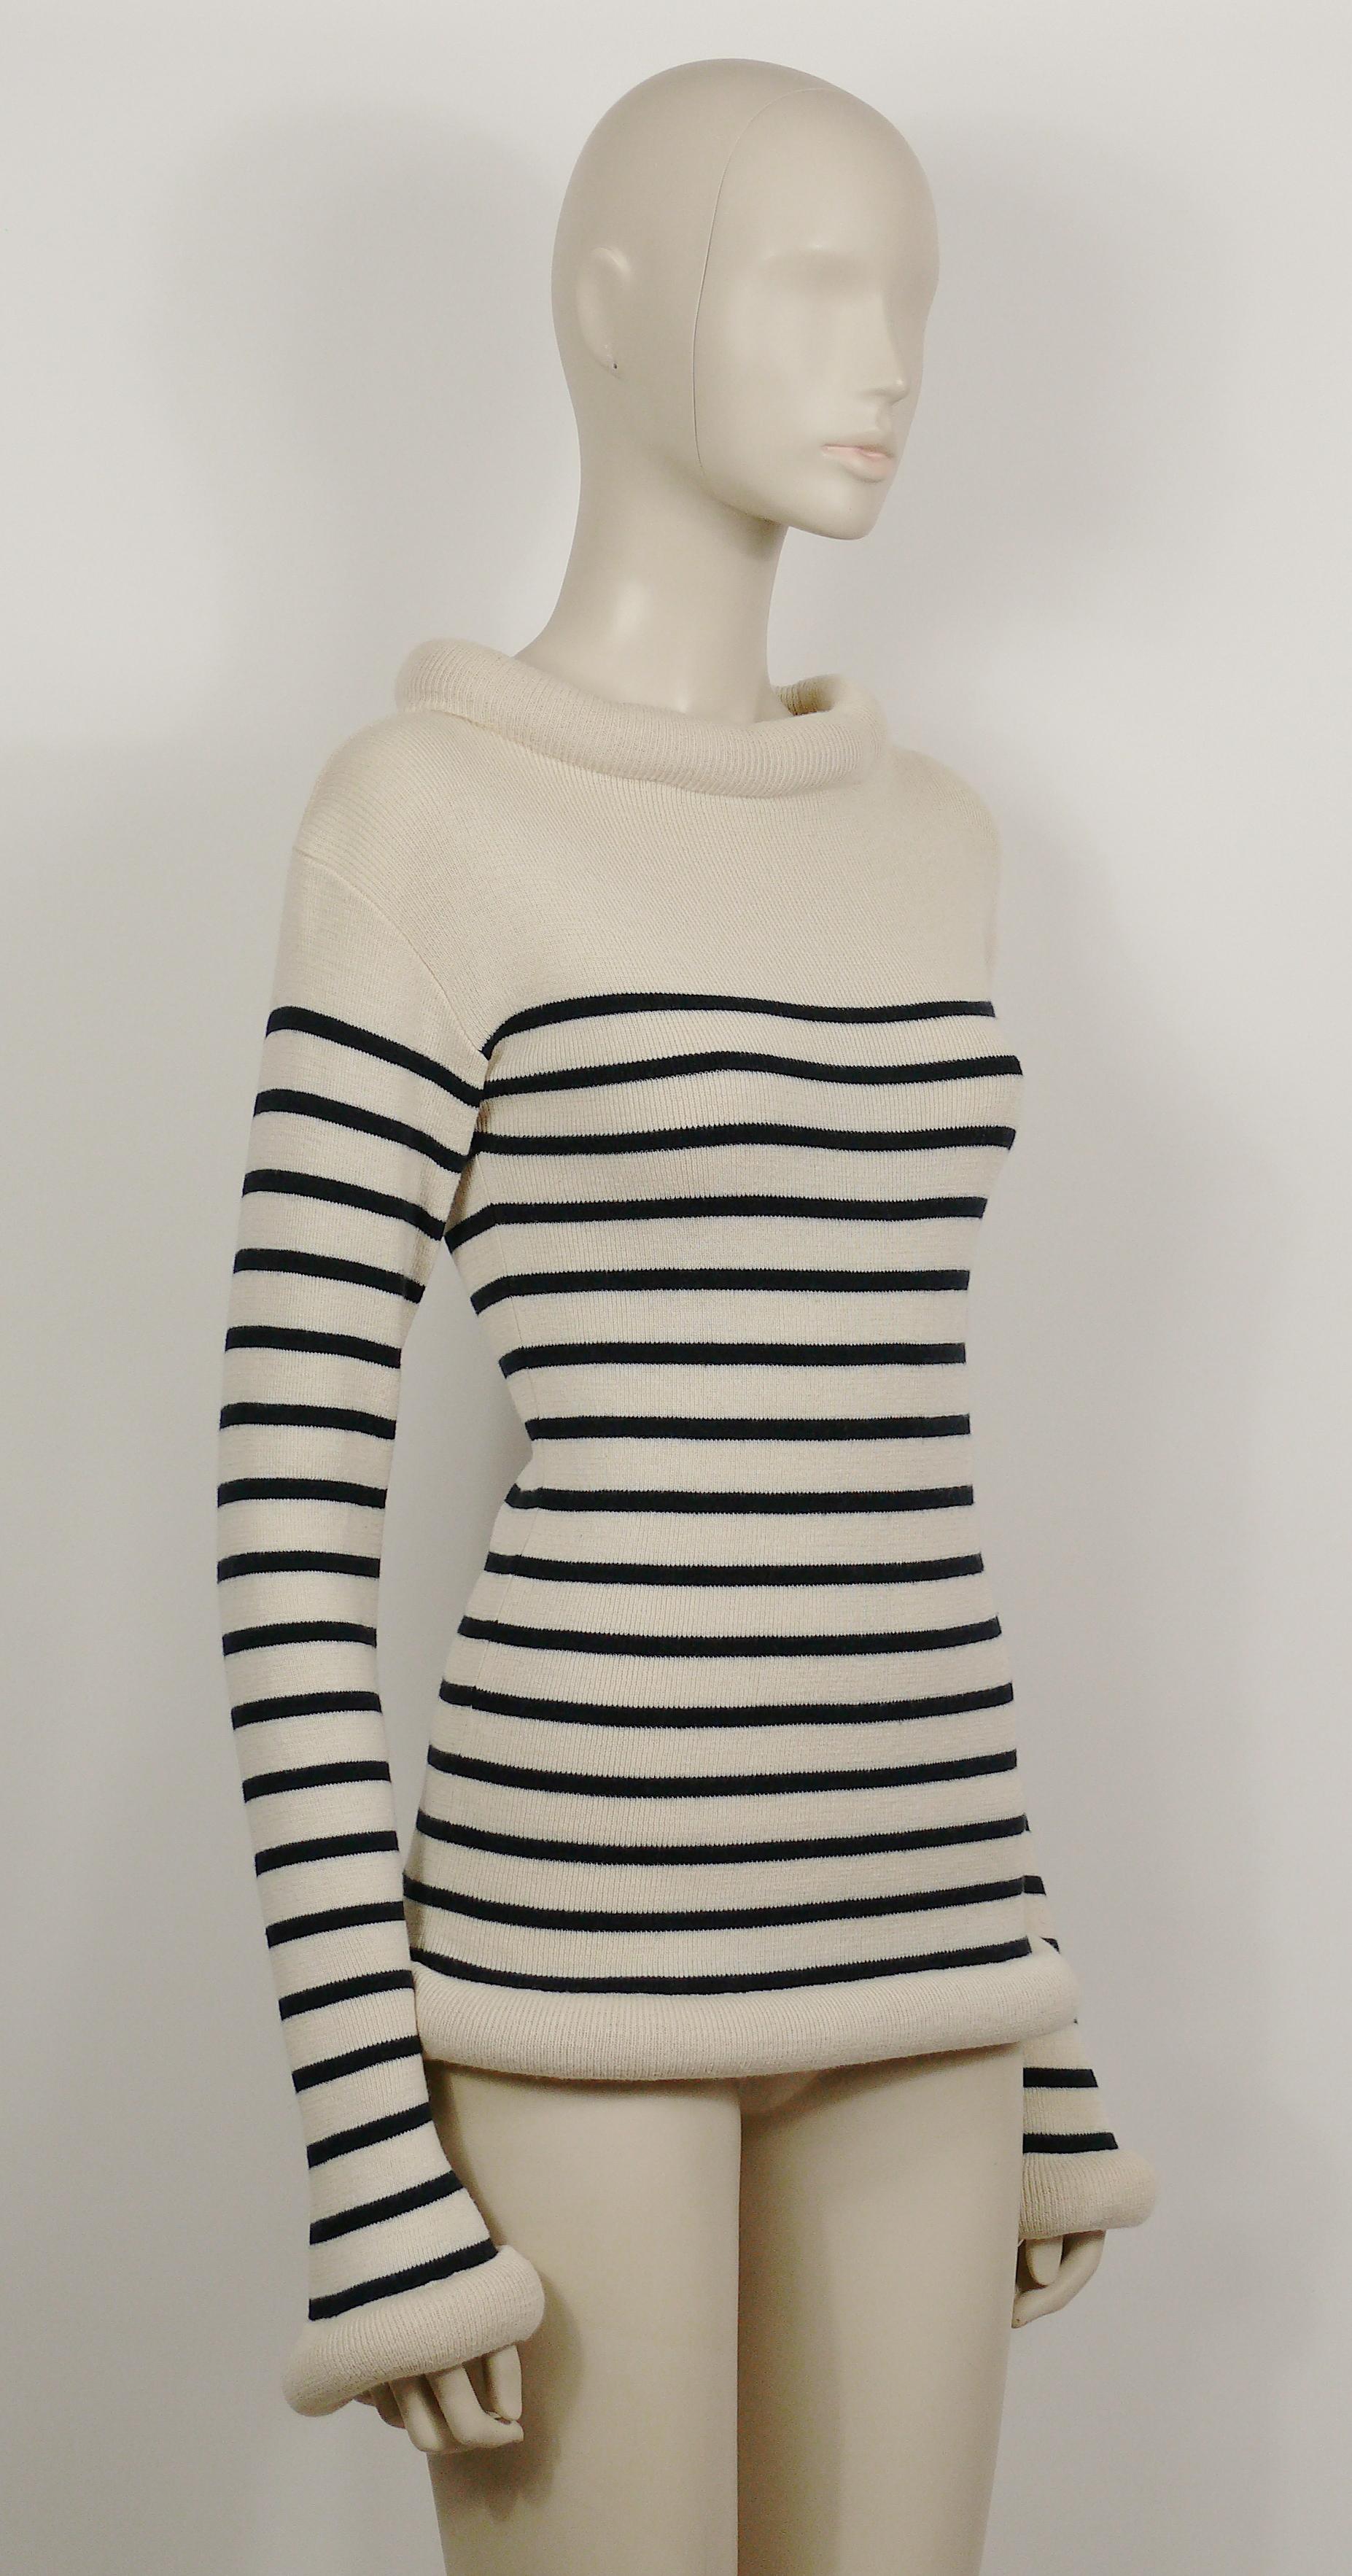 JEAN PAUL GAULTIER vintage iconic off-white/navy blue matelot sweater featuring a tube collar, cuffs and waist.

Label reads JEAN PAUL GAULTIER MAILLE Made in Italy.

Composition tag reads : 60% Virgin Wool / 40% Cotton.

Missing size tag.
Please